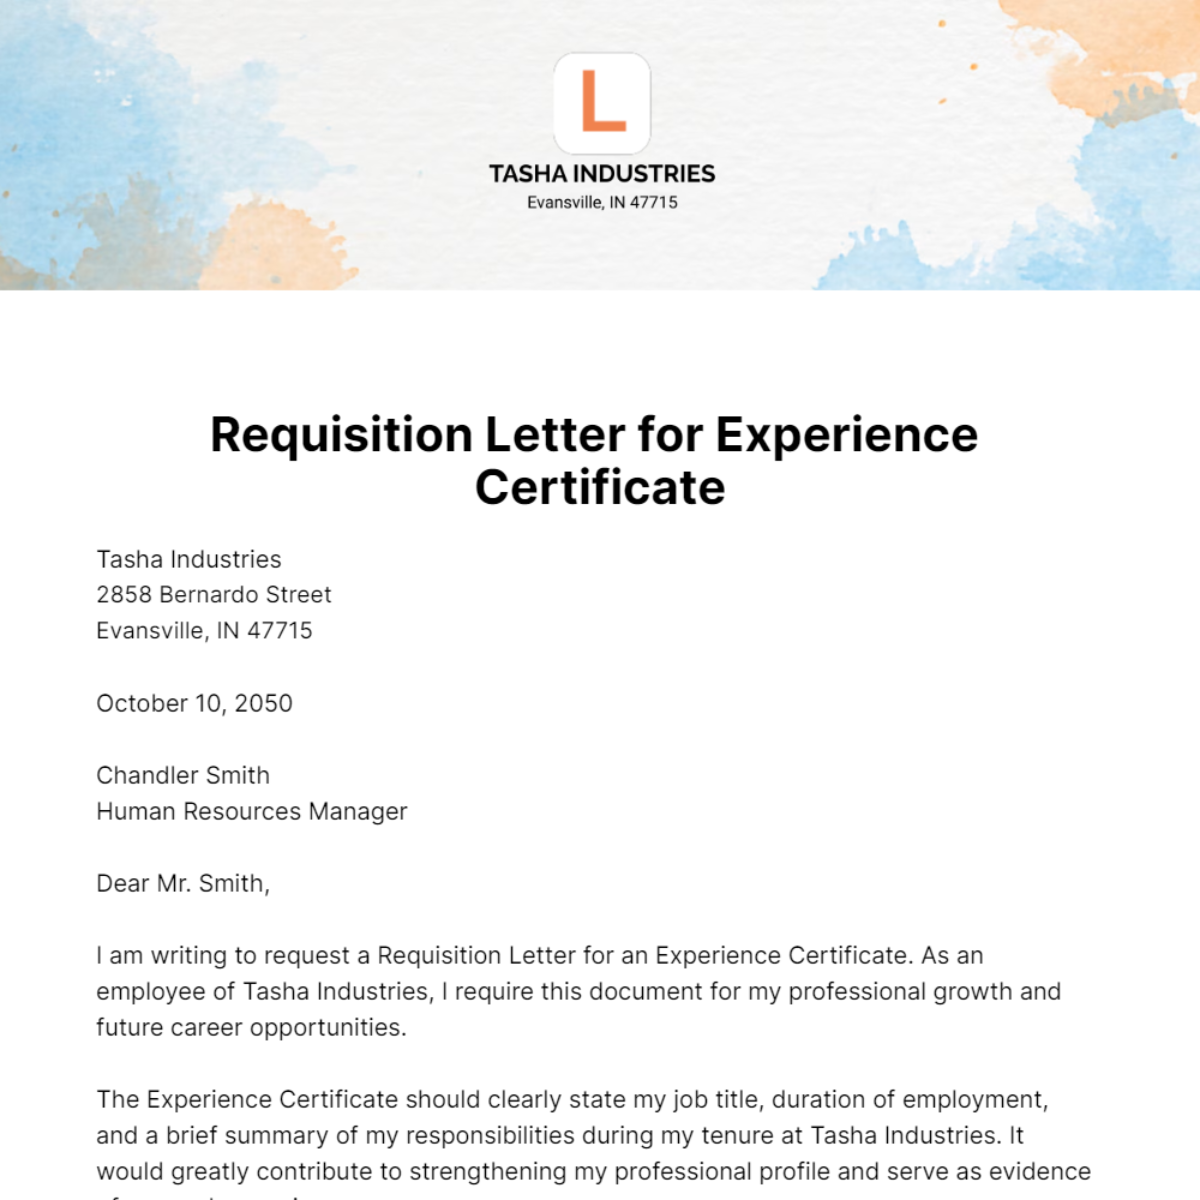 Requisition Letter for Experience Certificate Template